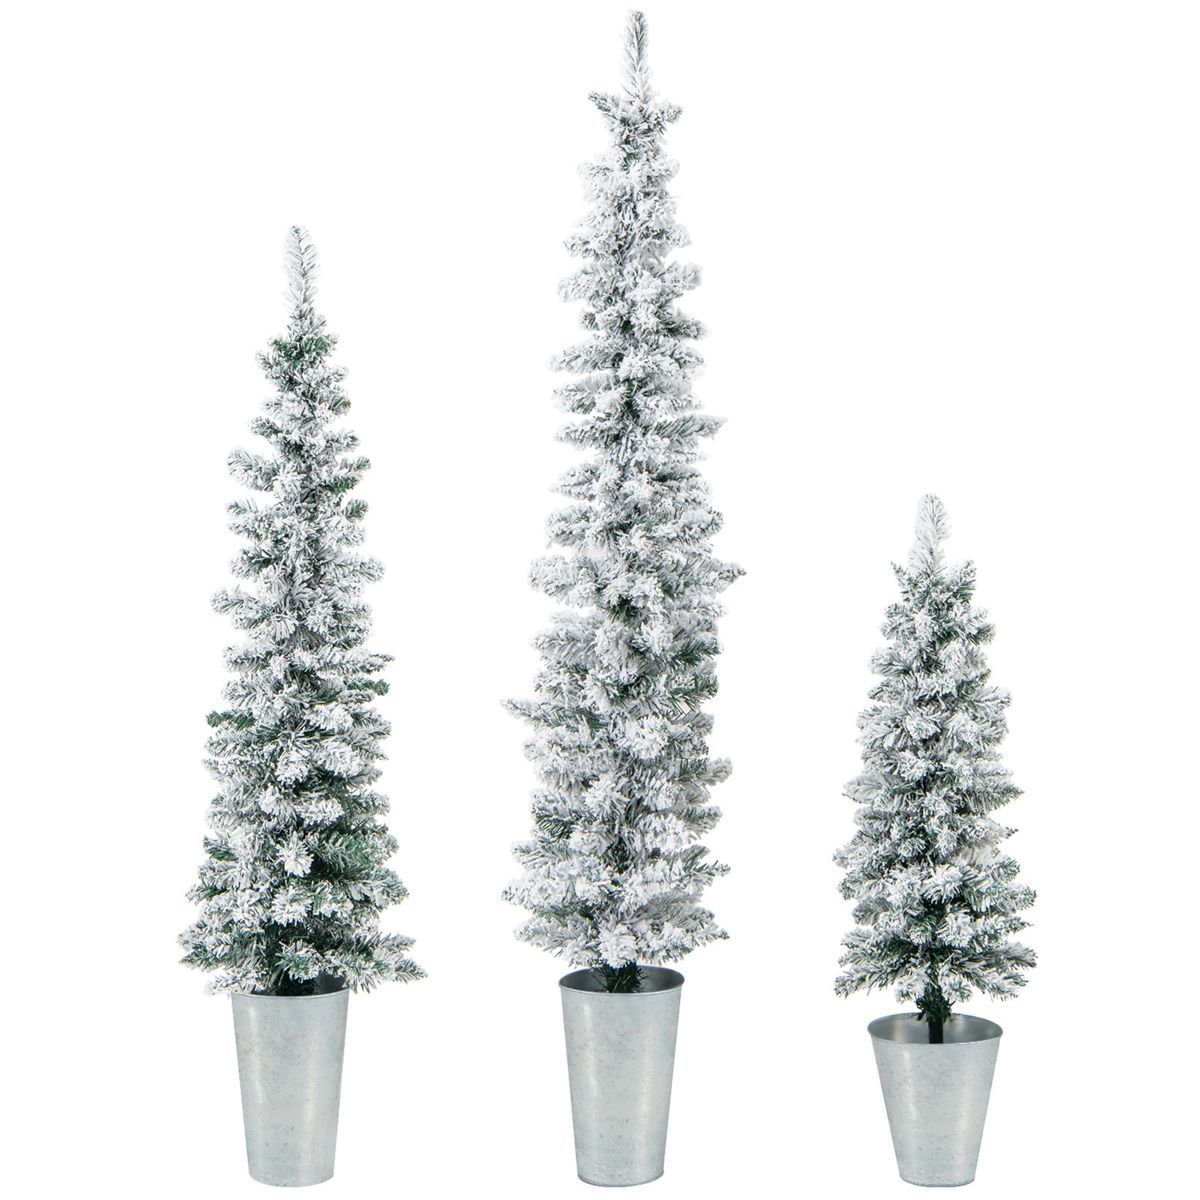 Costway Potted Artificial Christmas Tree Set of 3 3/4/5 FT Snow-Flocked Slim Faux Trees | Target